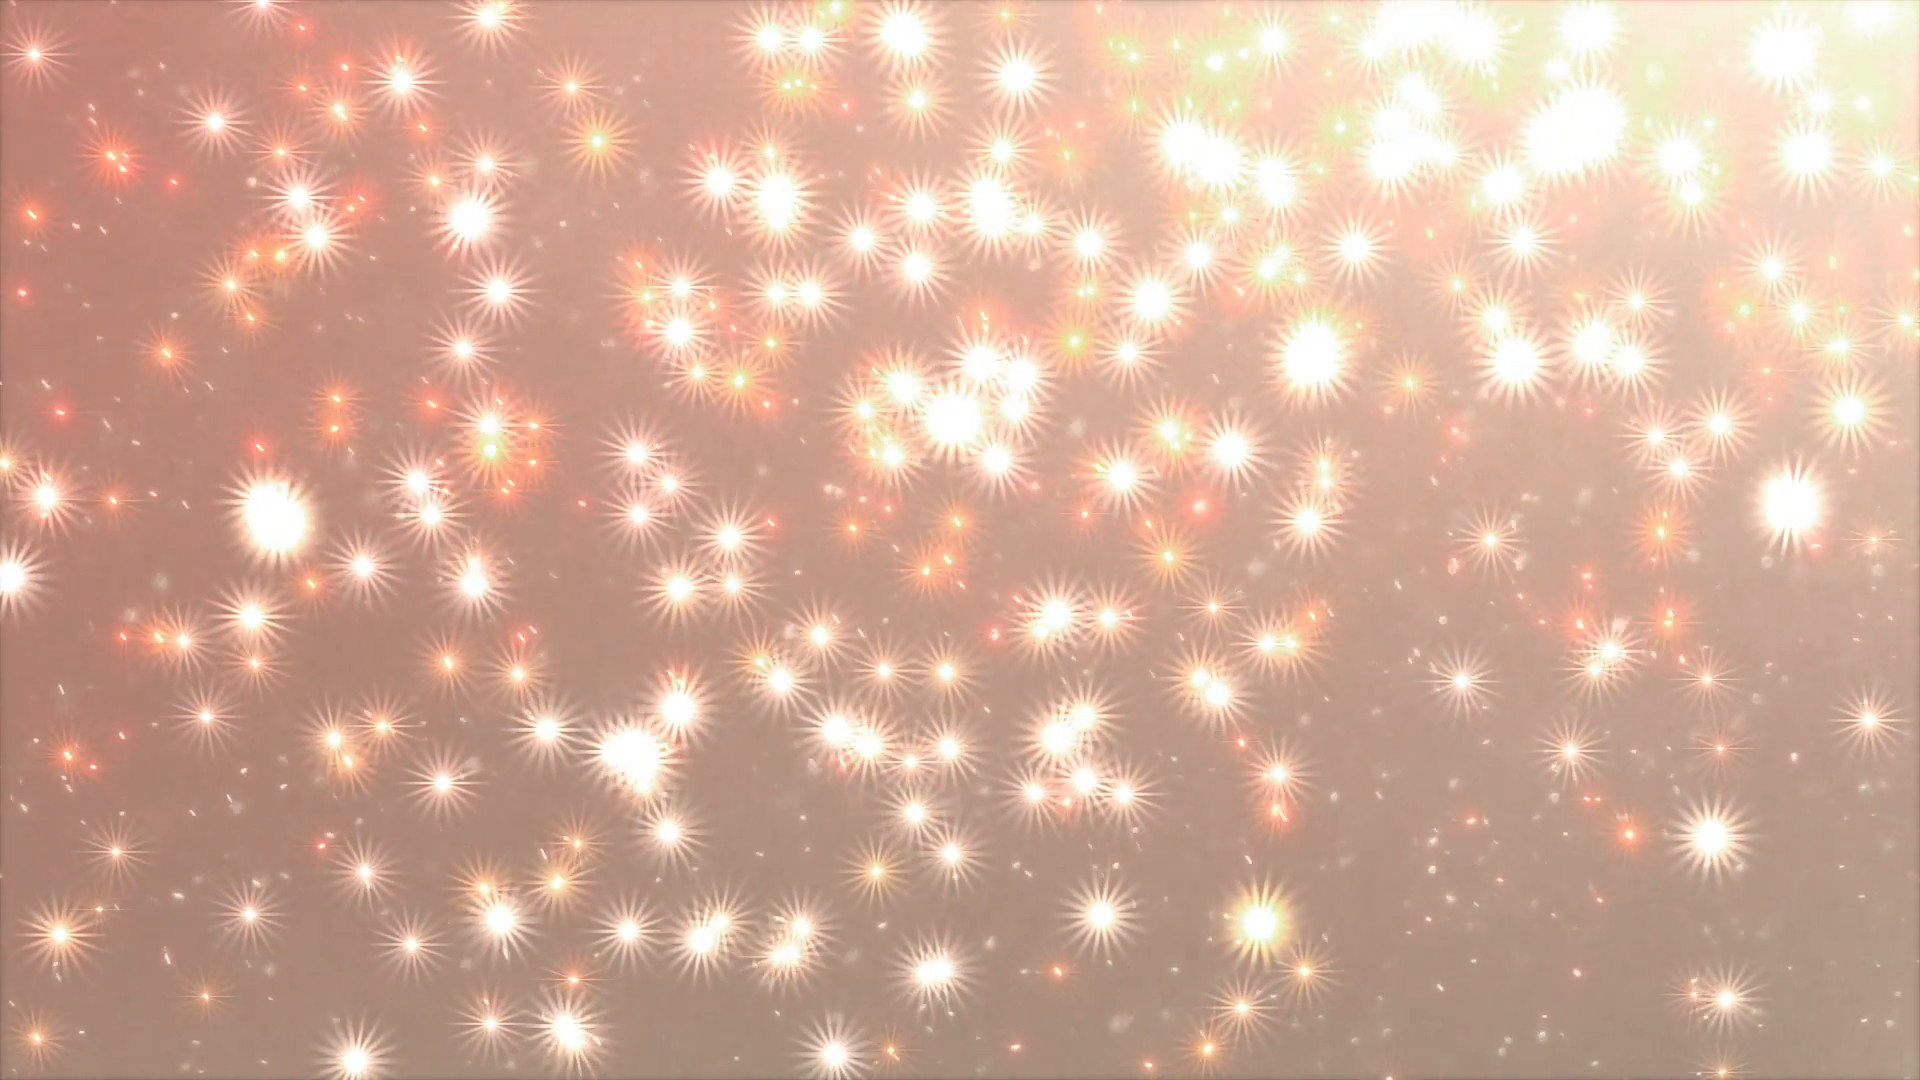 1920x1080 Flying particles 11 - rain of sparks, shiny snowflakes - Background Motion  Background - VideoBlocks